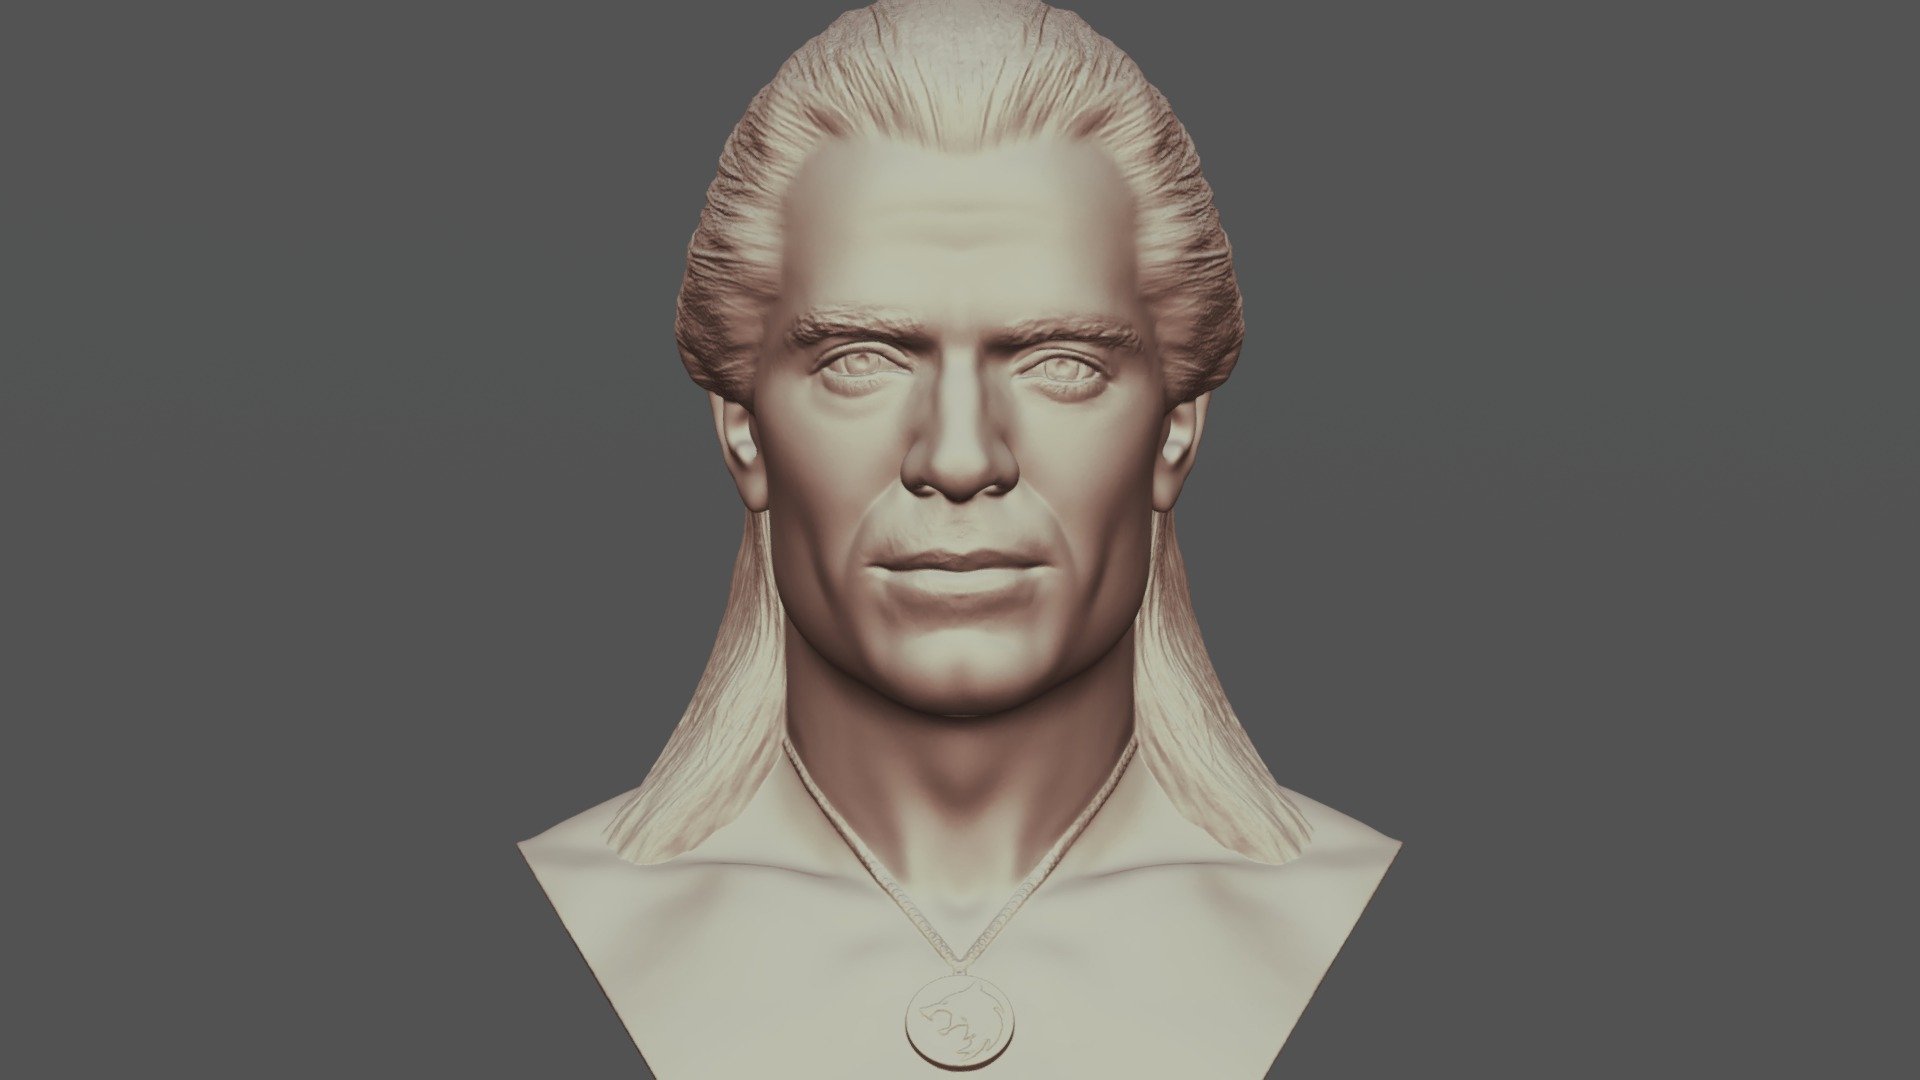 Geralt The Witcher bust for 3D printing